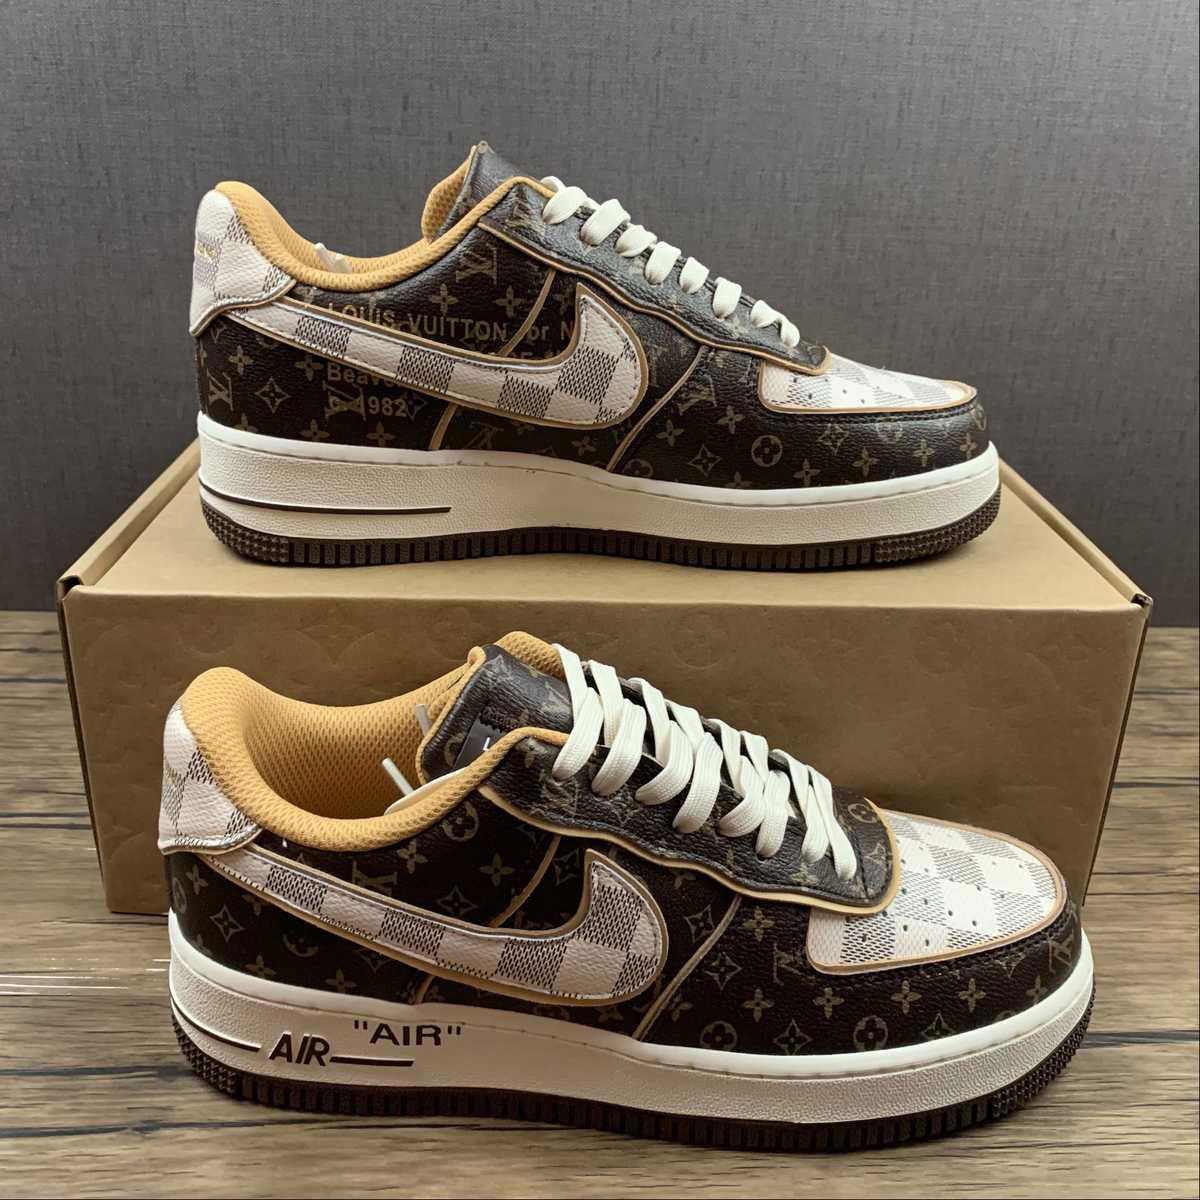 2022      shoes Company grade Air Force 1 Air Force     ow-top leisure shoes 